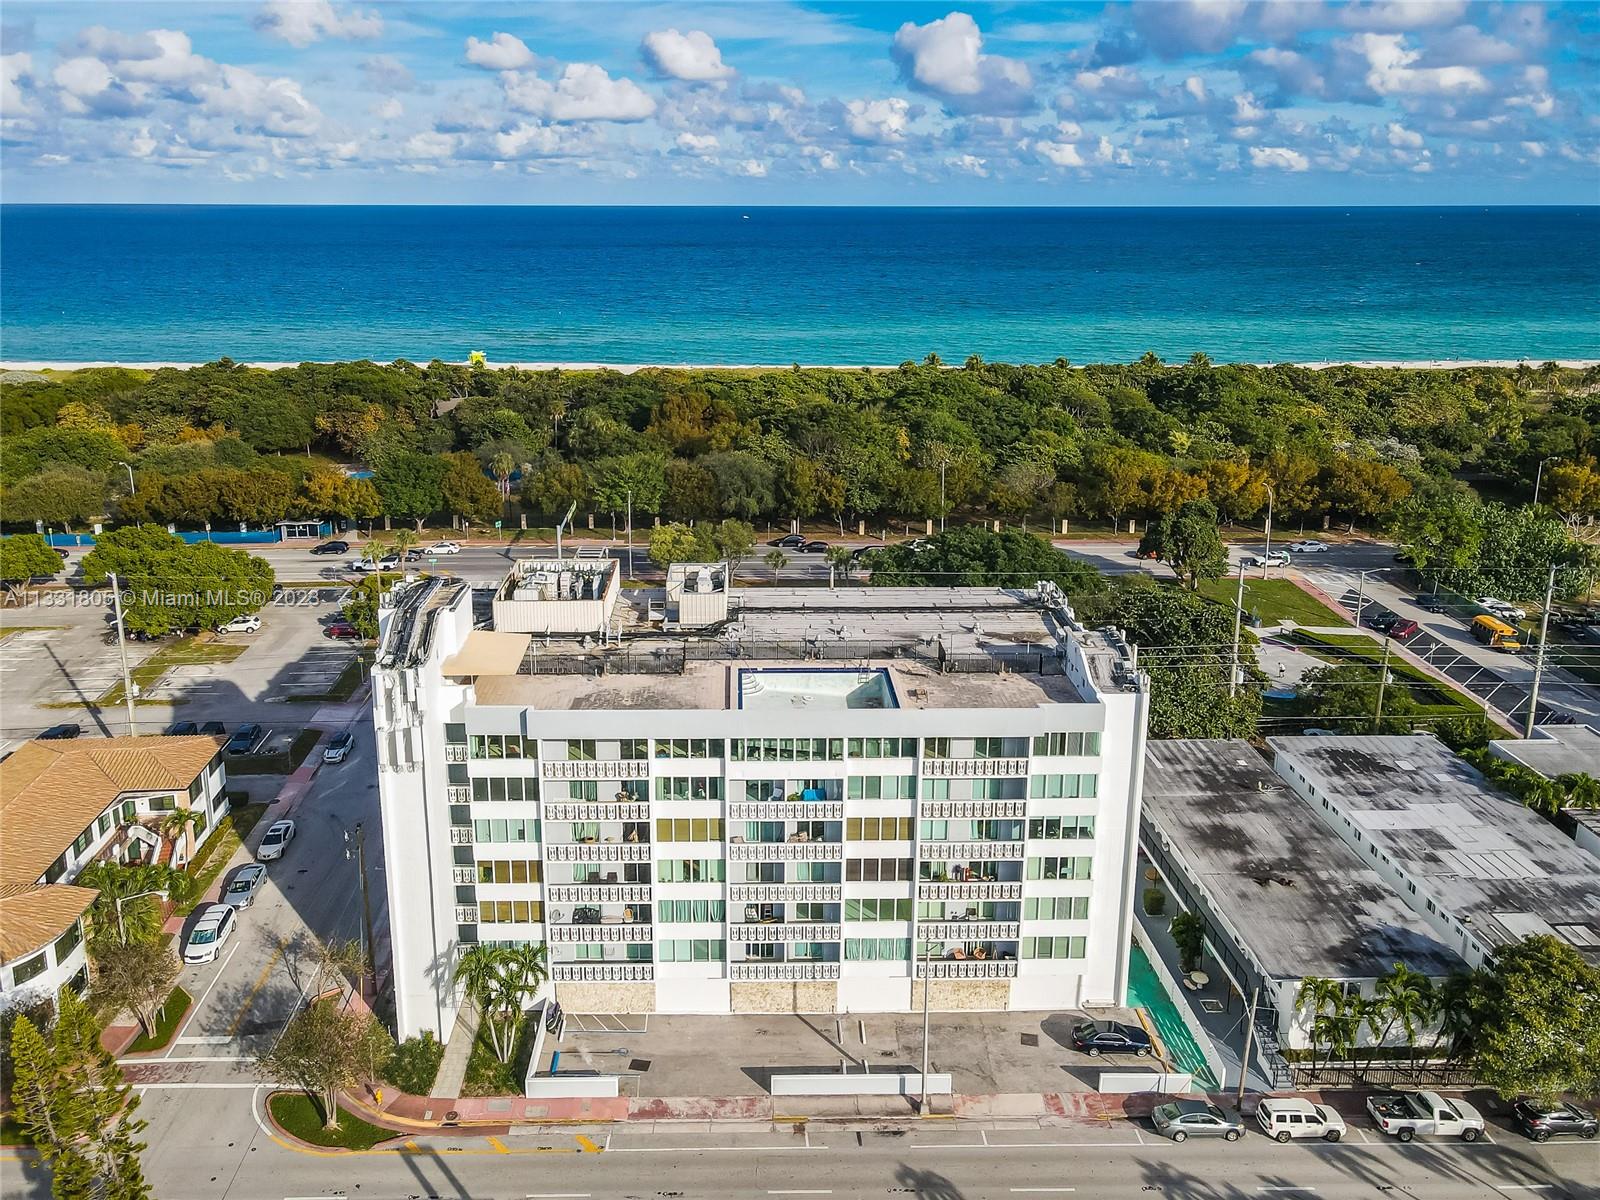 WELCOME TO MIAMI BEACH! LOCATION FOR AVID BEACH GOERS IS OUTSTANDING, THE APARTMENT IS LOCATED ON THE PENTHOUSE FLOOR OF THE BUILDING. BEING A CORNER UNIT IS A PLUS AS THERE ARE NO NEIGHBORS SURROUNDING THE PROPERTY, KITCHEN WAS RECENTLY REMODELED, CERAMIC TILING ALL THROUGHOUT THE UNIT. DO NOT HESITATE TO MAKE THIS PROPERTY YOUR OWN.